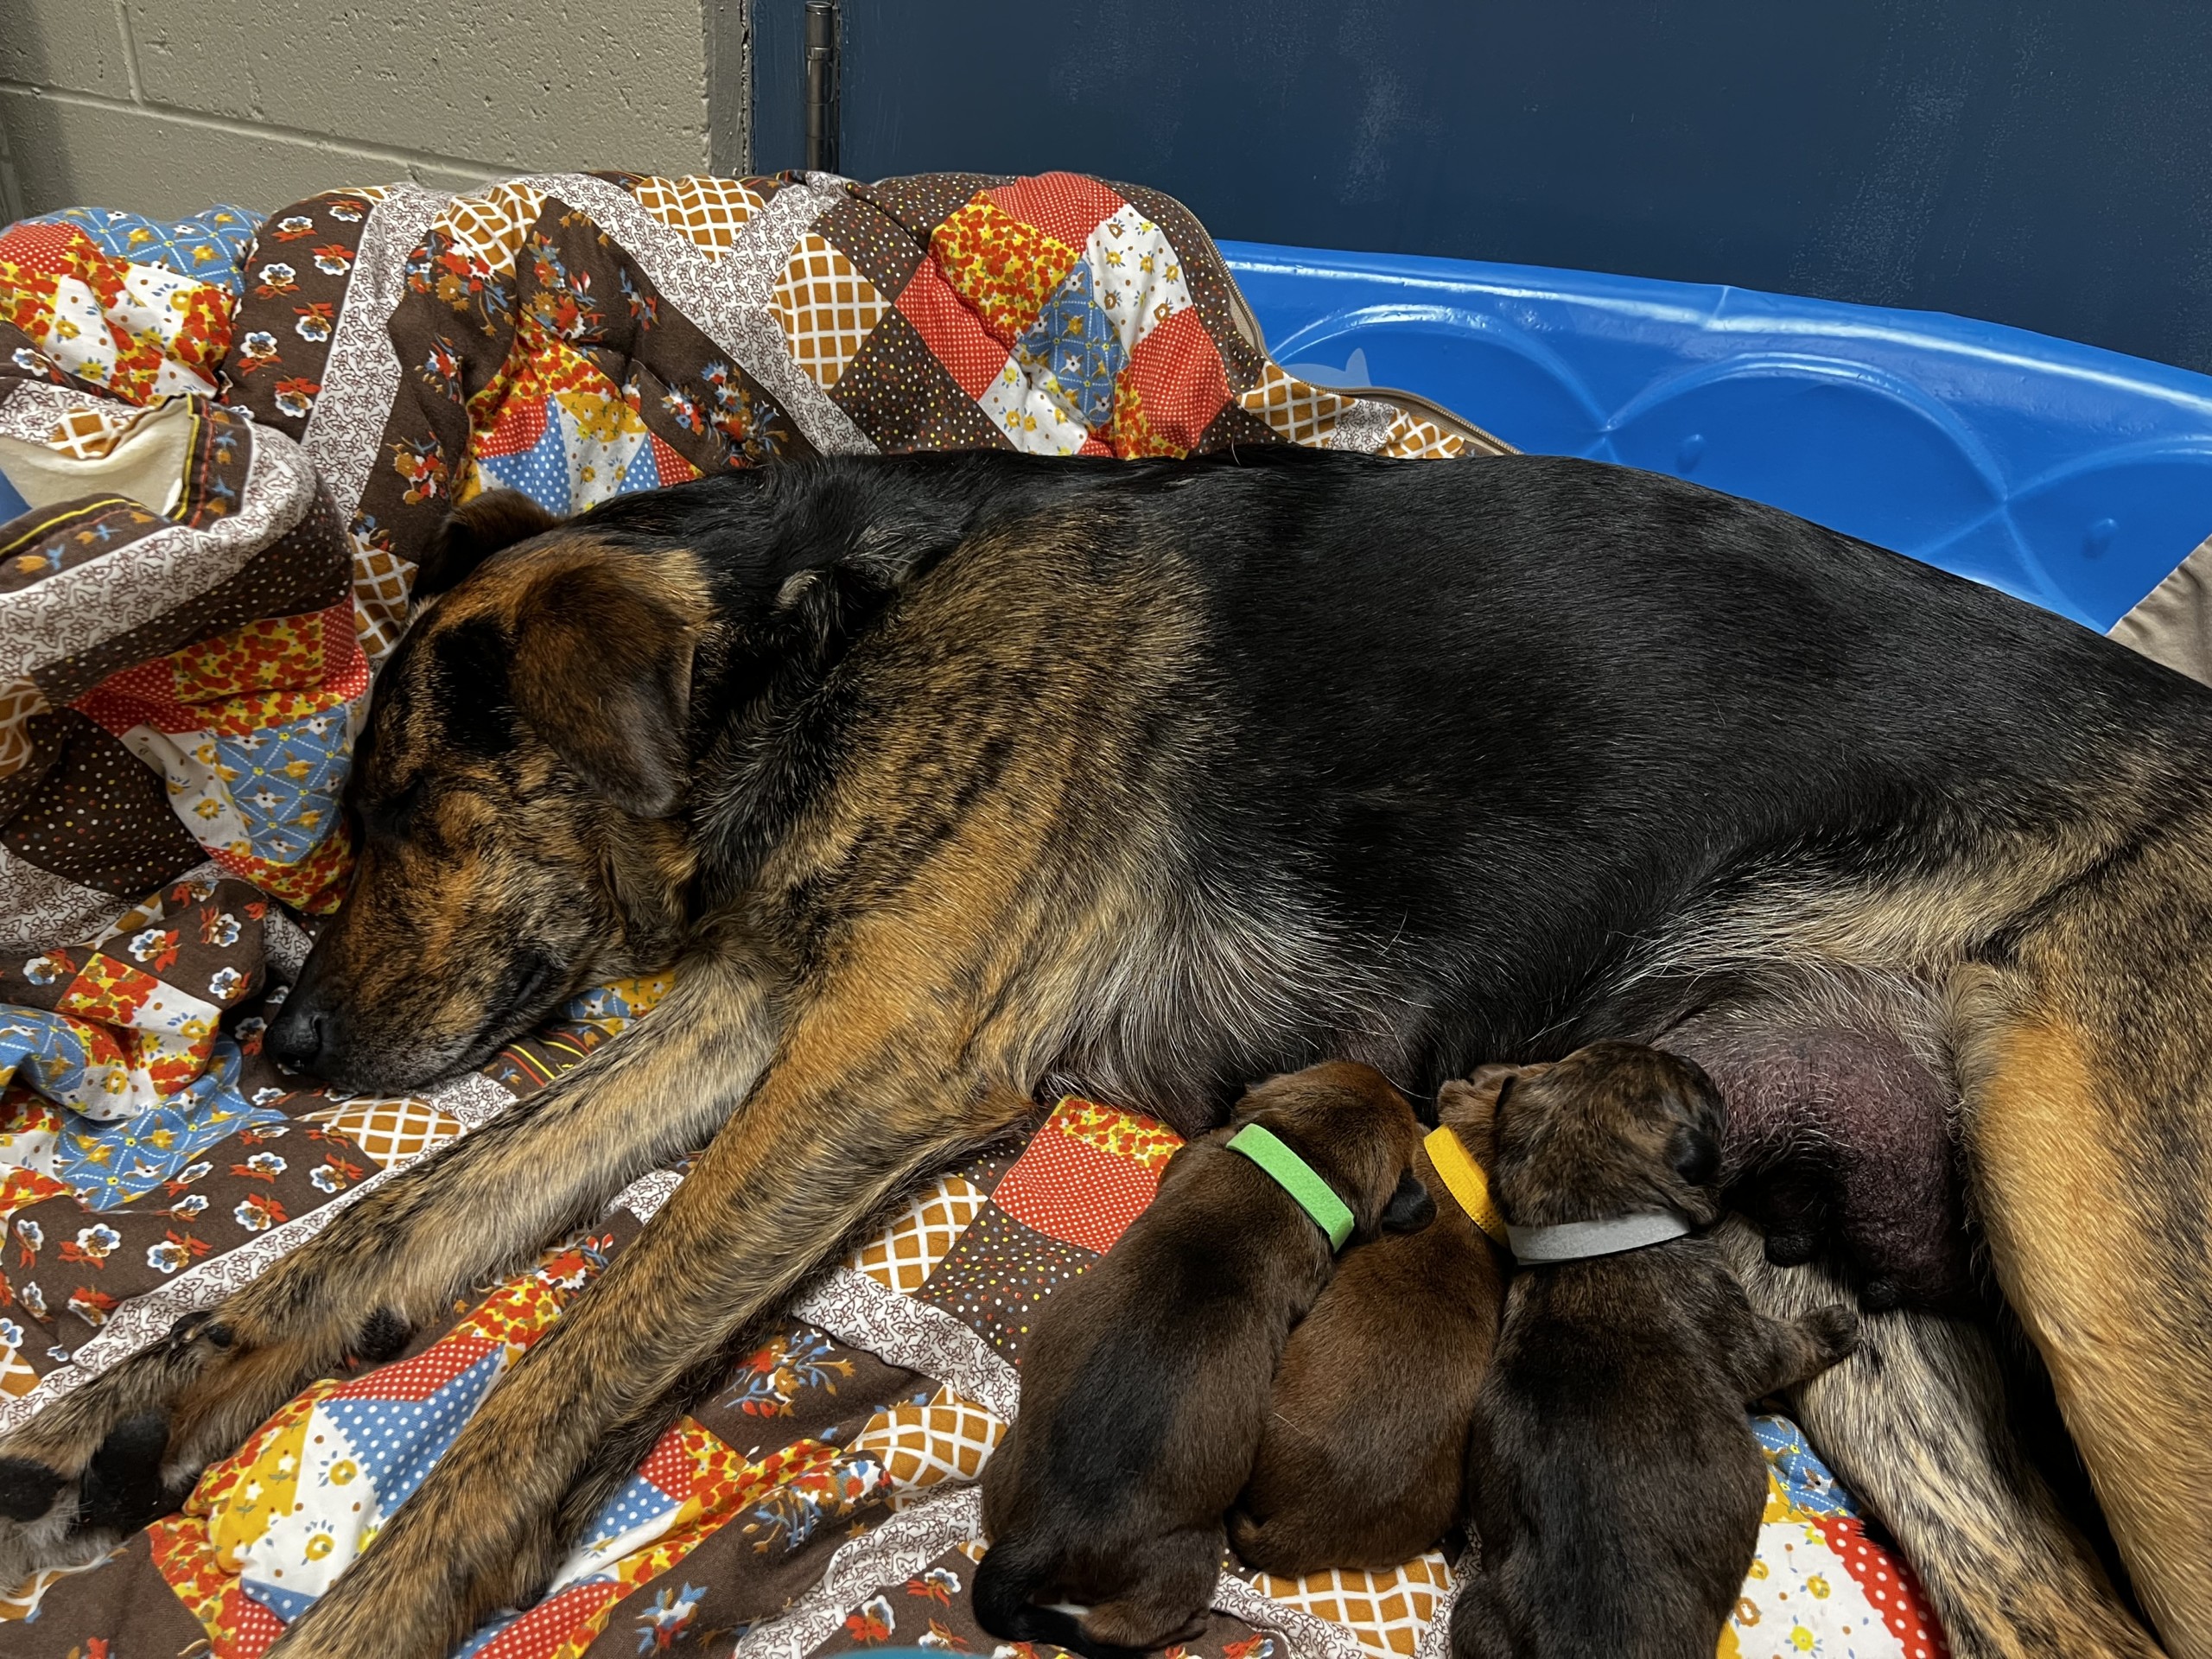 humane society of kitchener waterloo asks for donations to help dog three puppies scaled